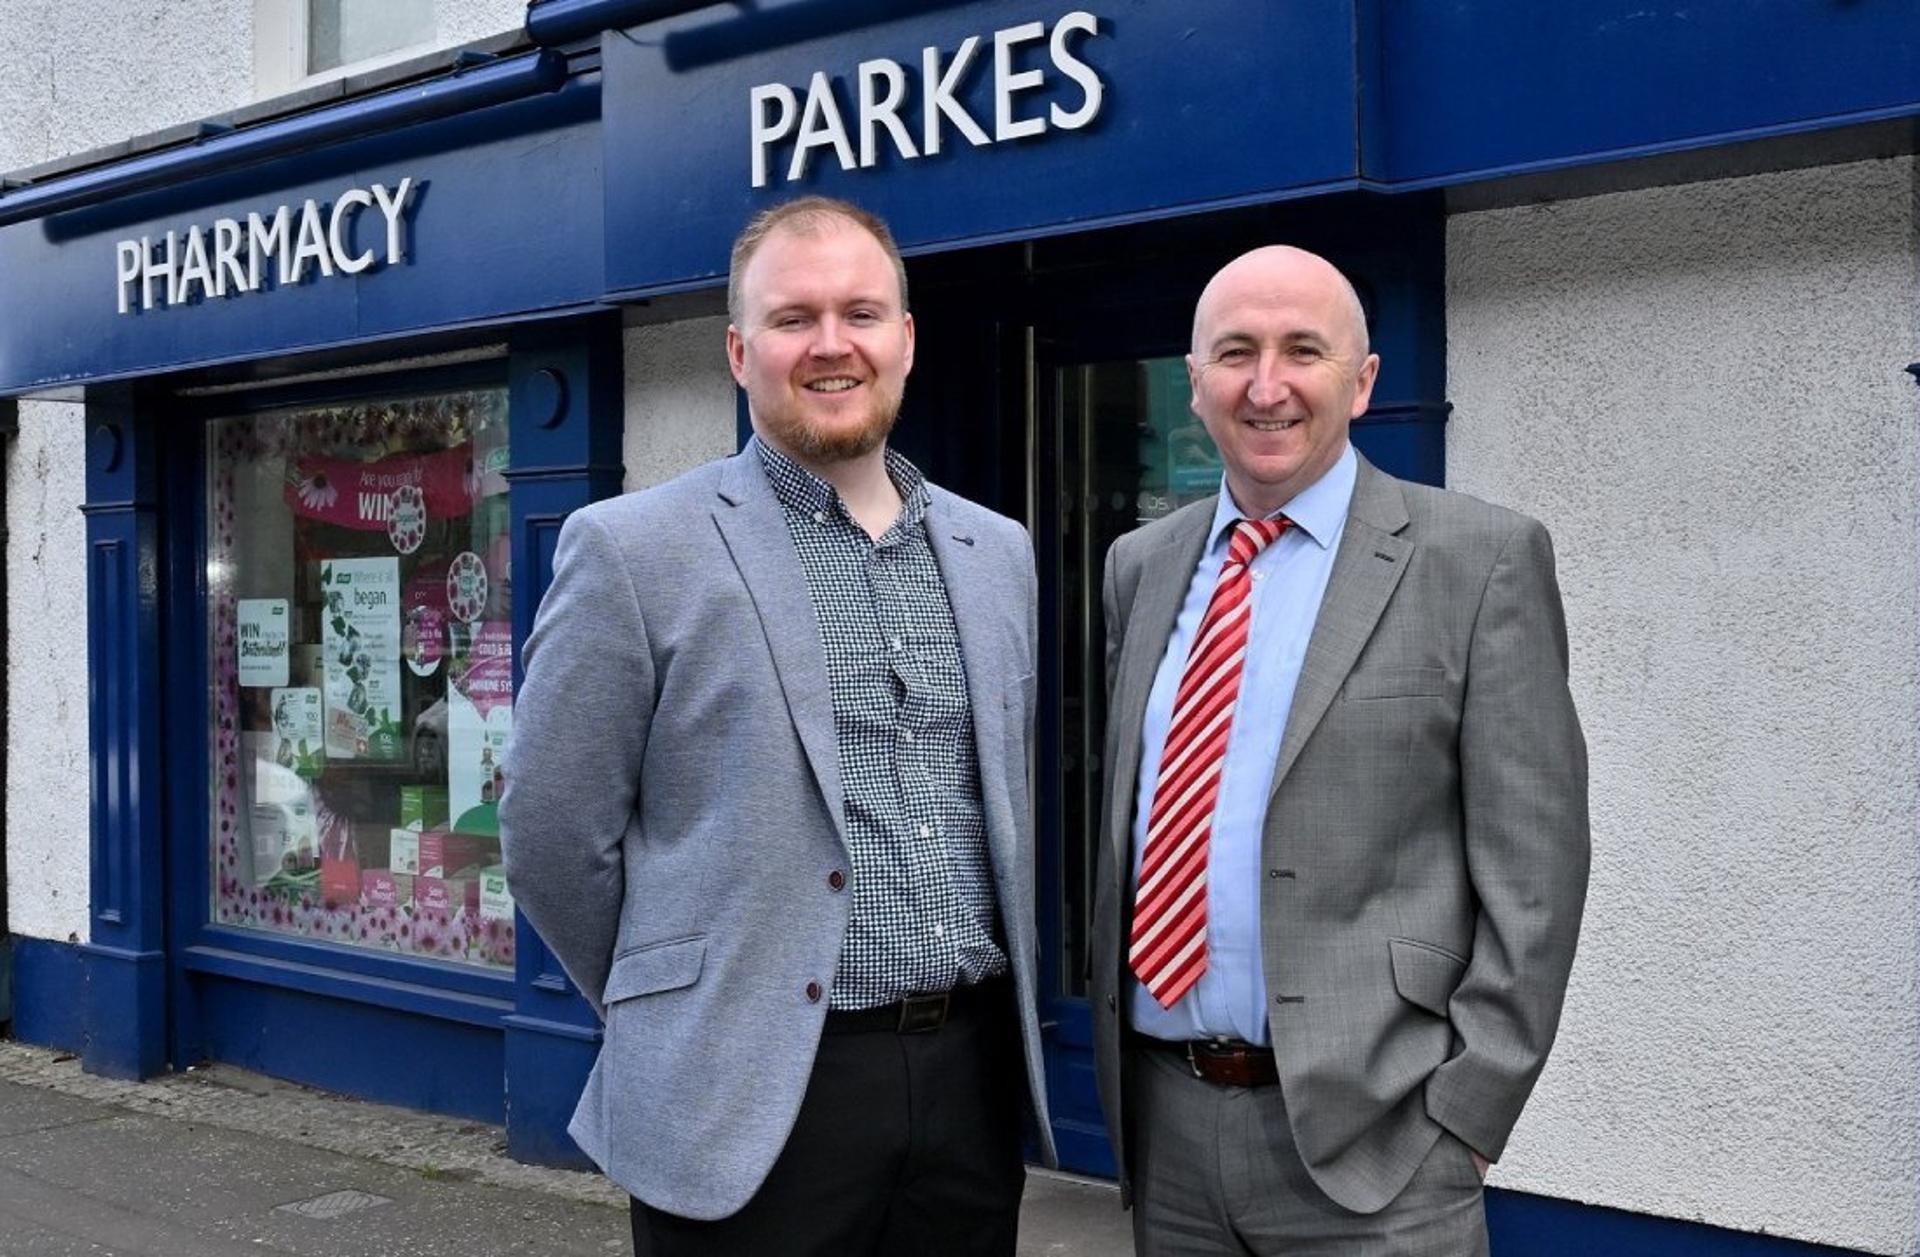 NI pharmacy group acquires third site 